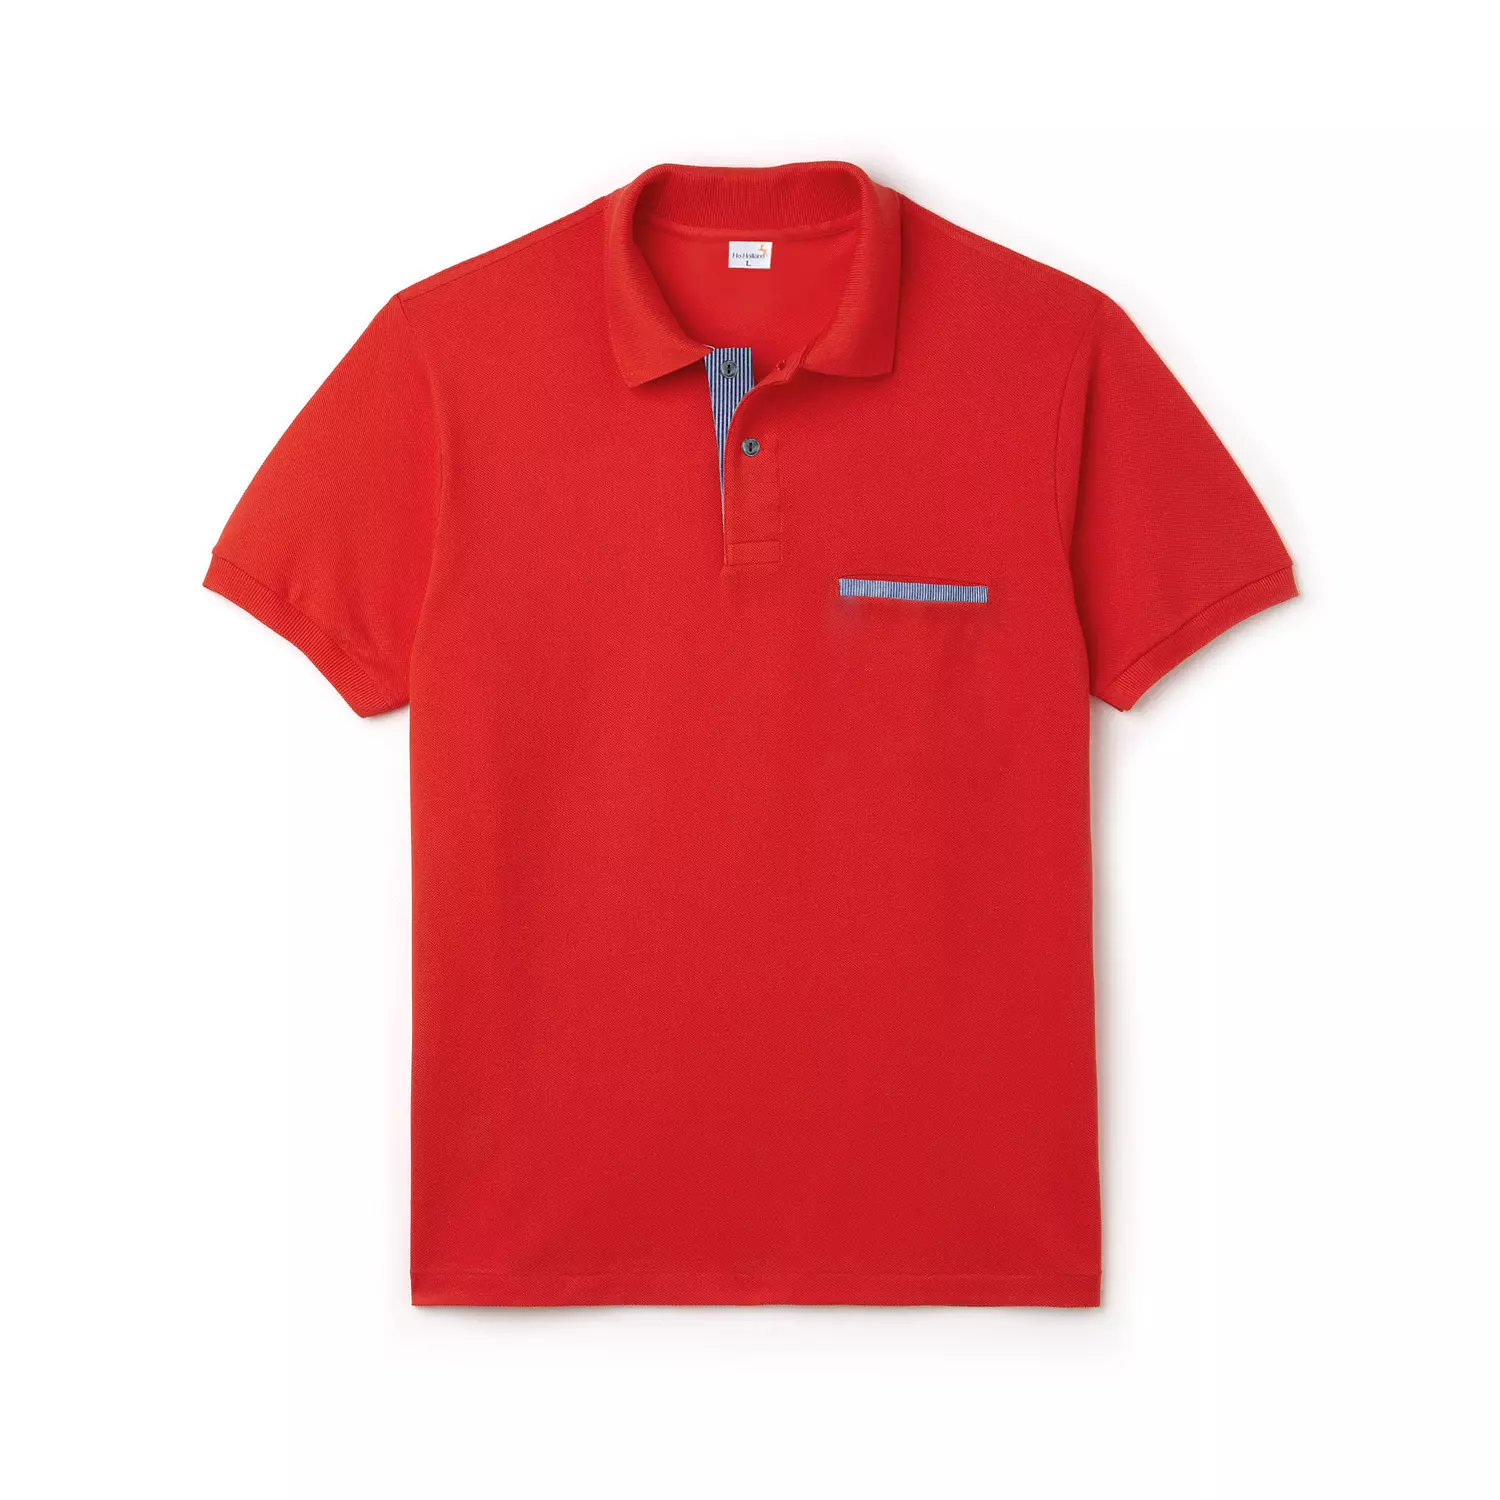 Polo T shirt - Red hover image